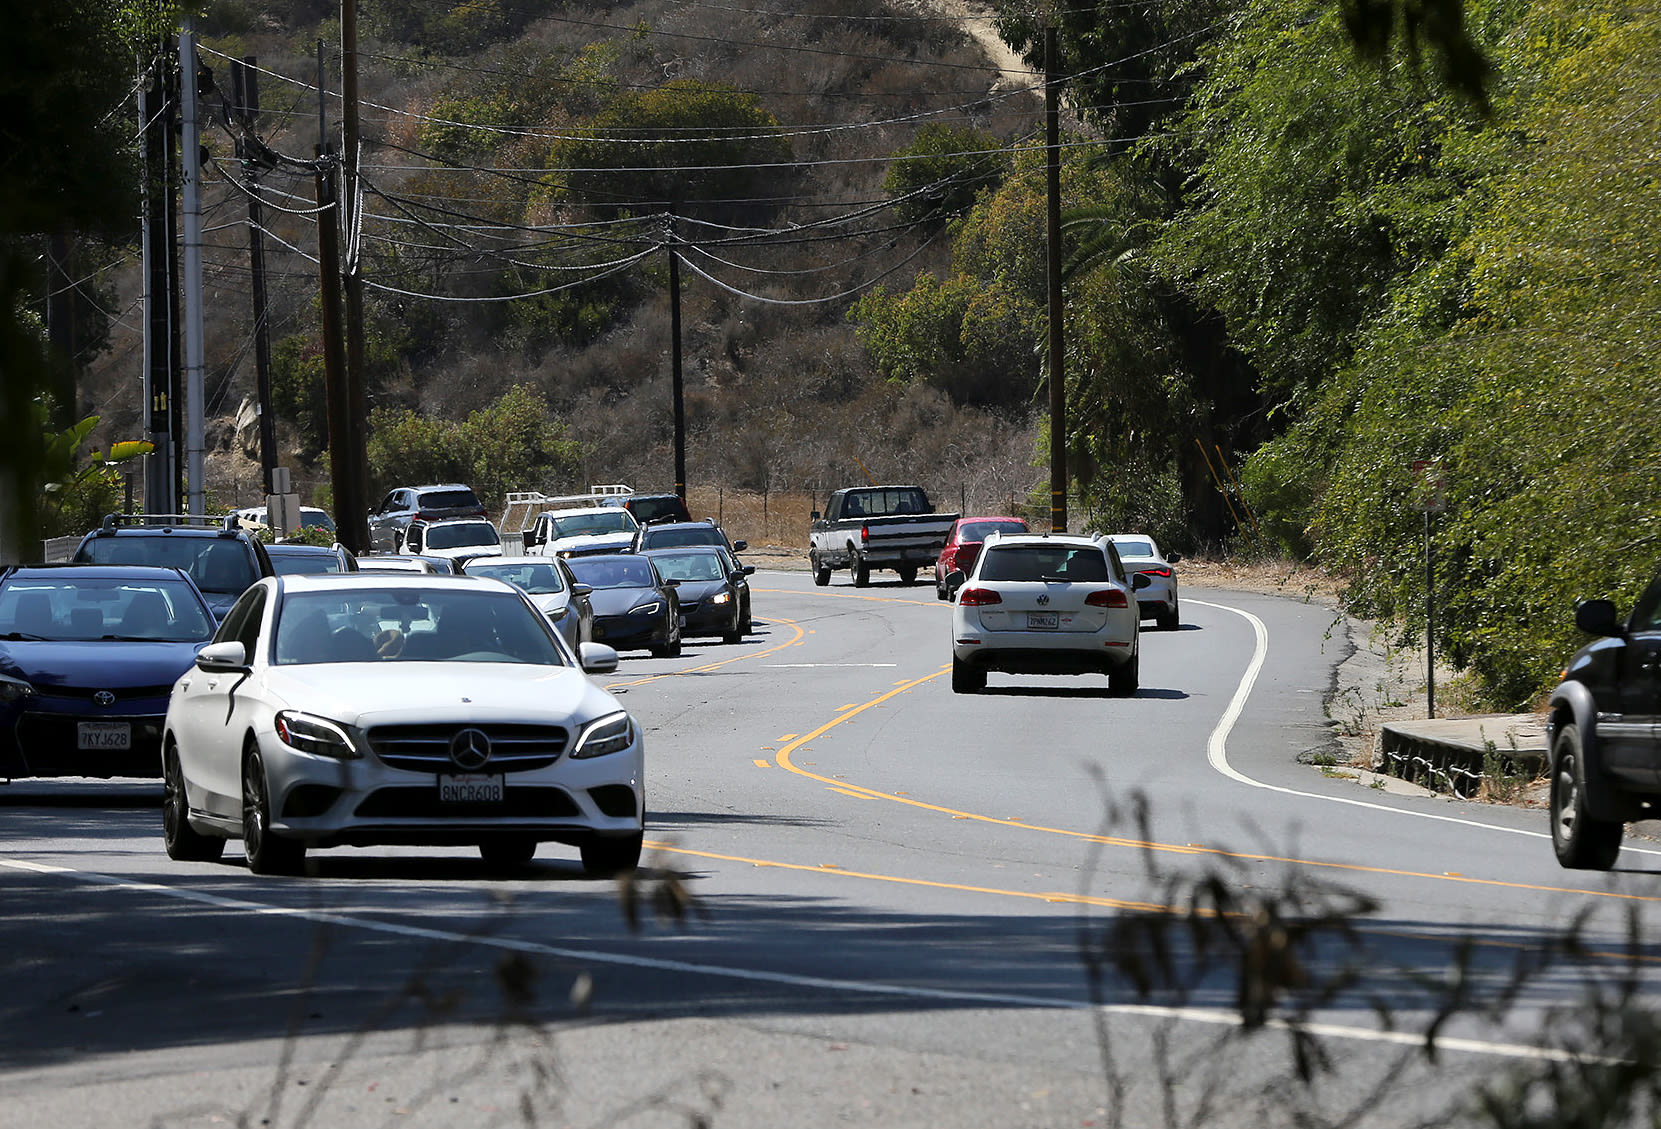 Laguna Beach seeks public input on priorities for the canyon